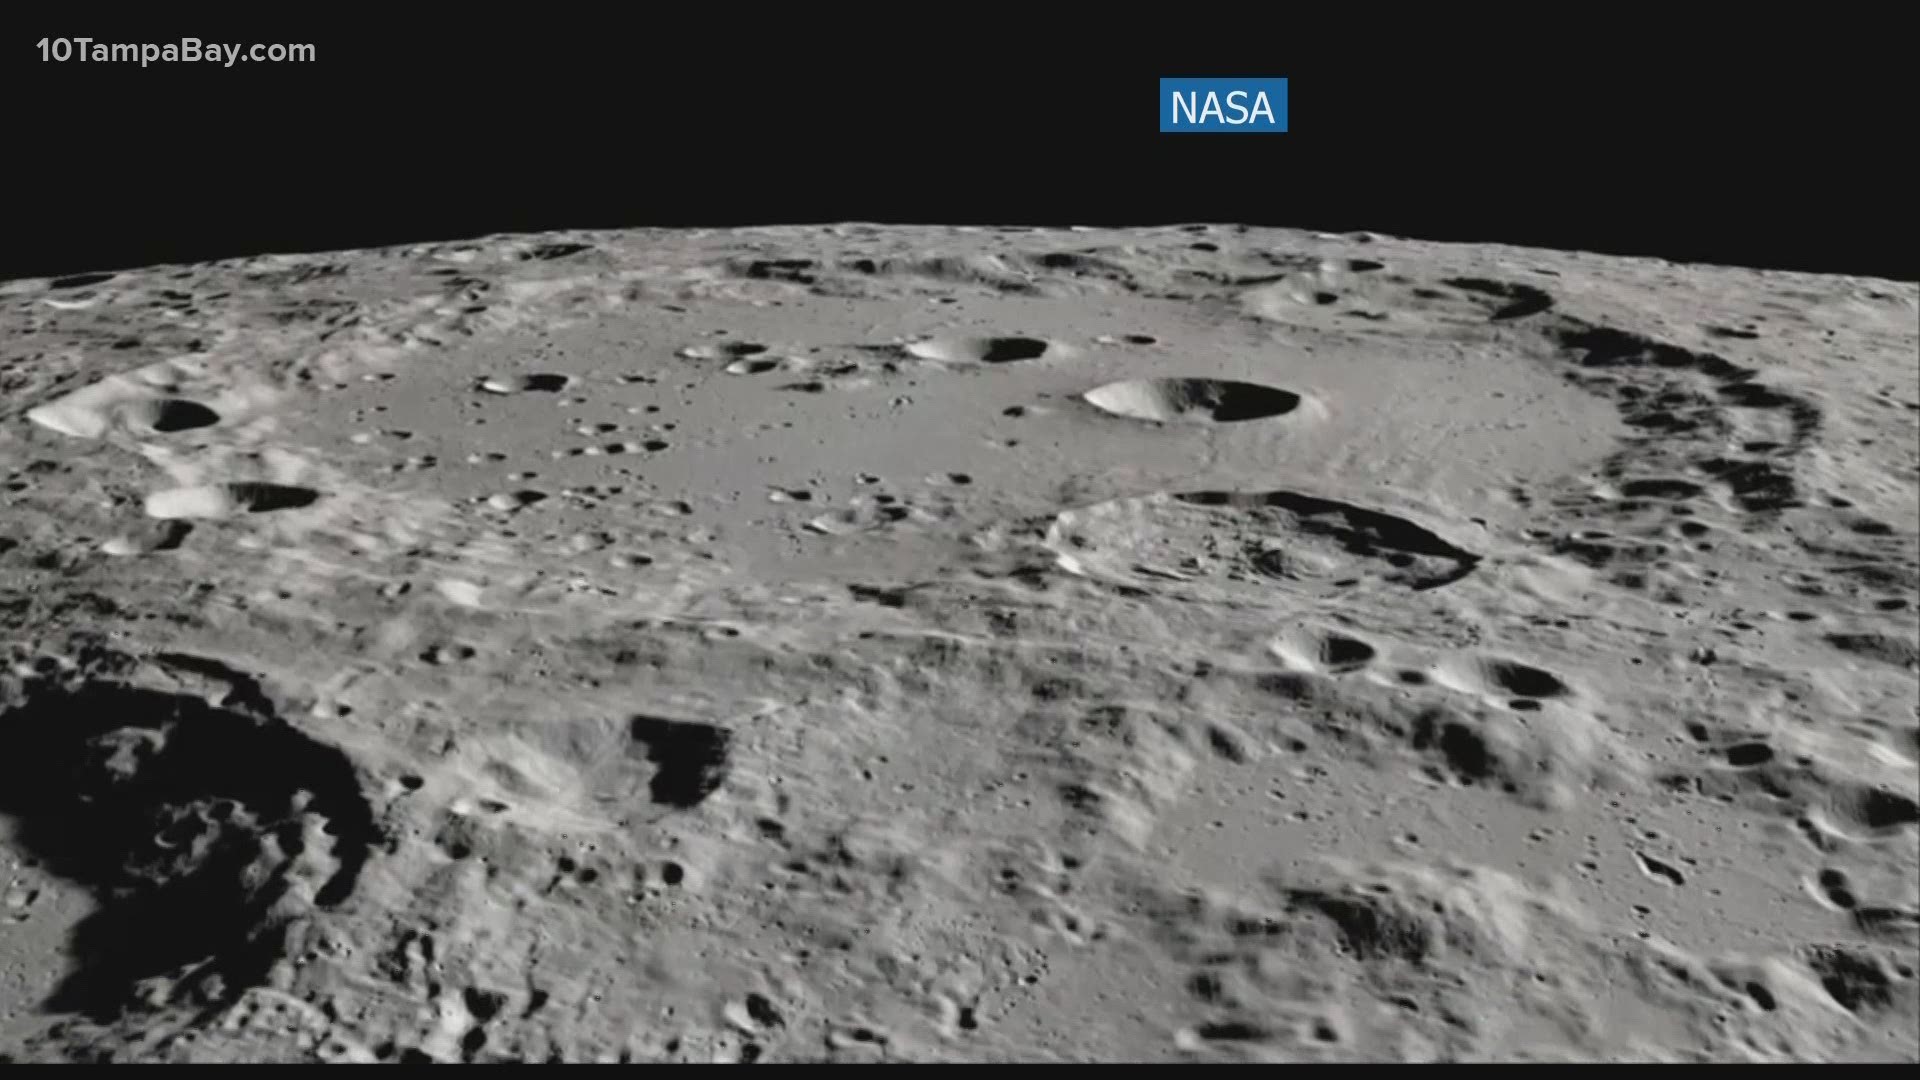 This new discovery contributes to NASA’s efforts to learn about the Moon in support of deep space exploration